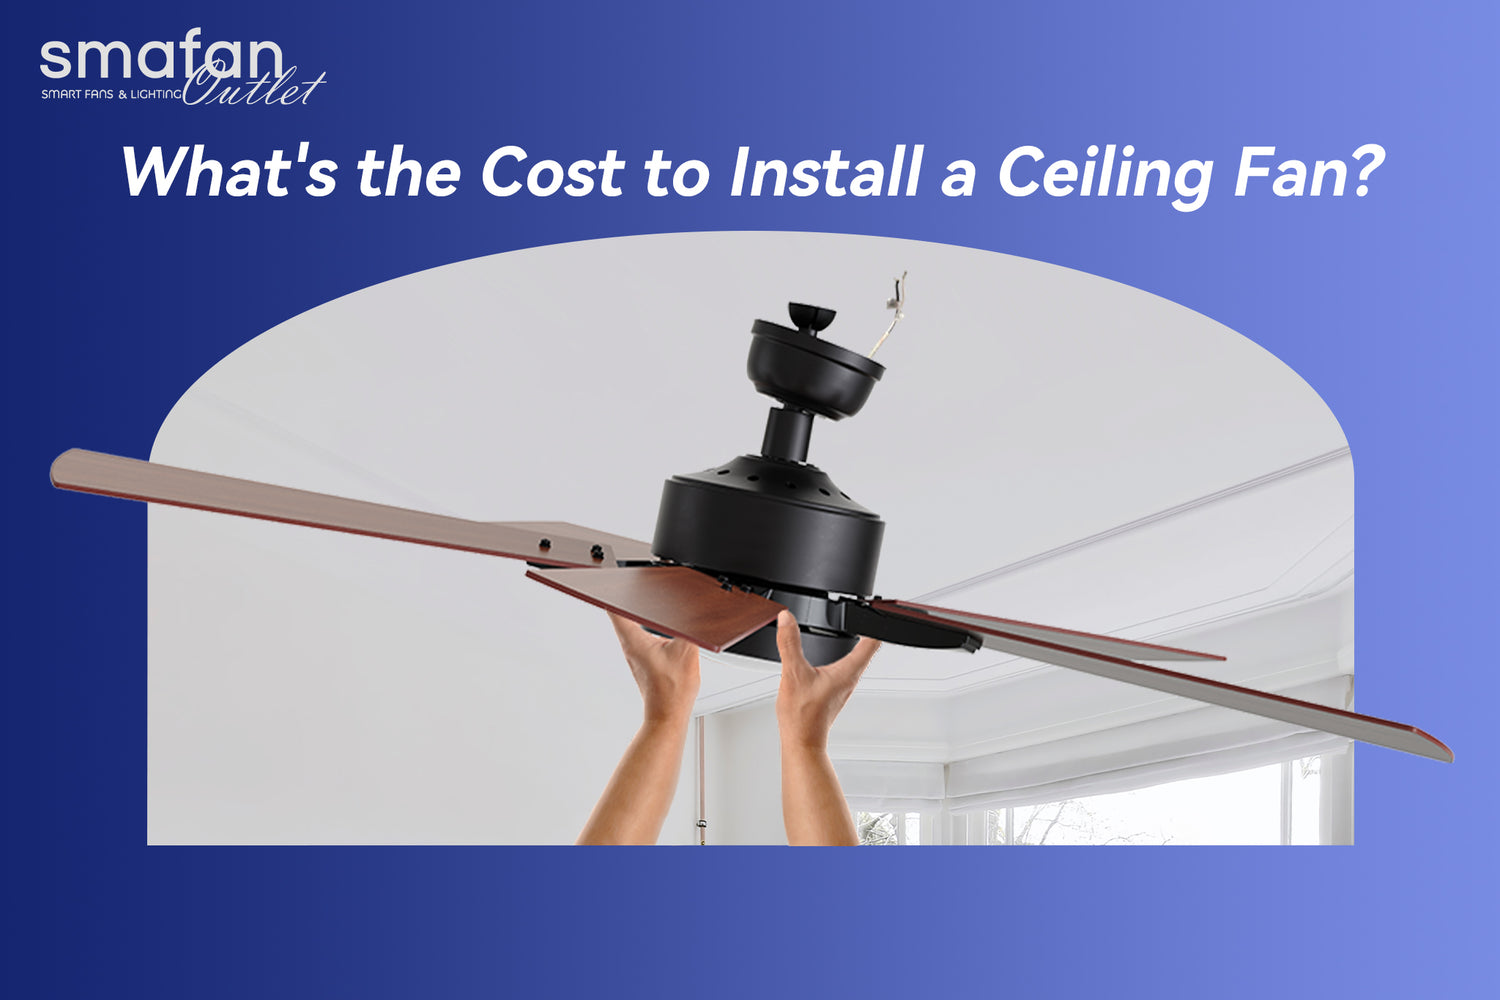 What's the Cost to Install a Ceiling Fan?